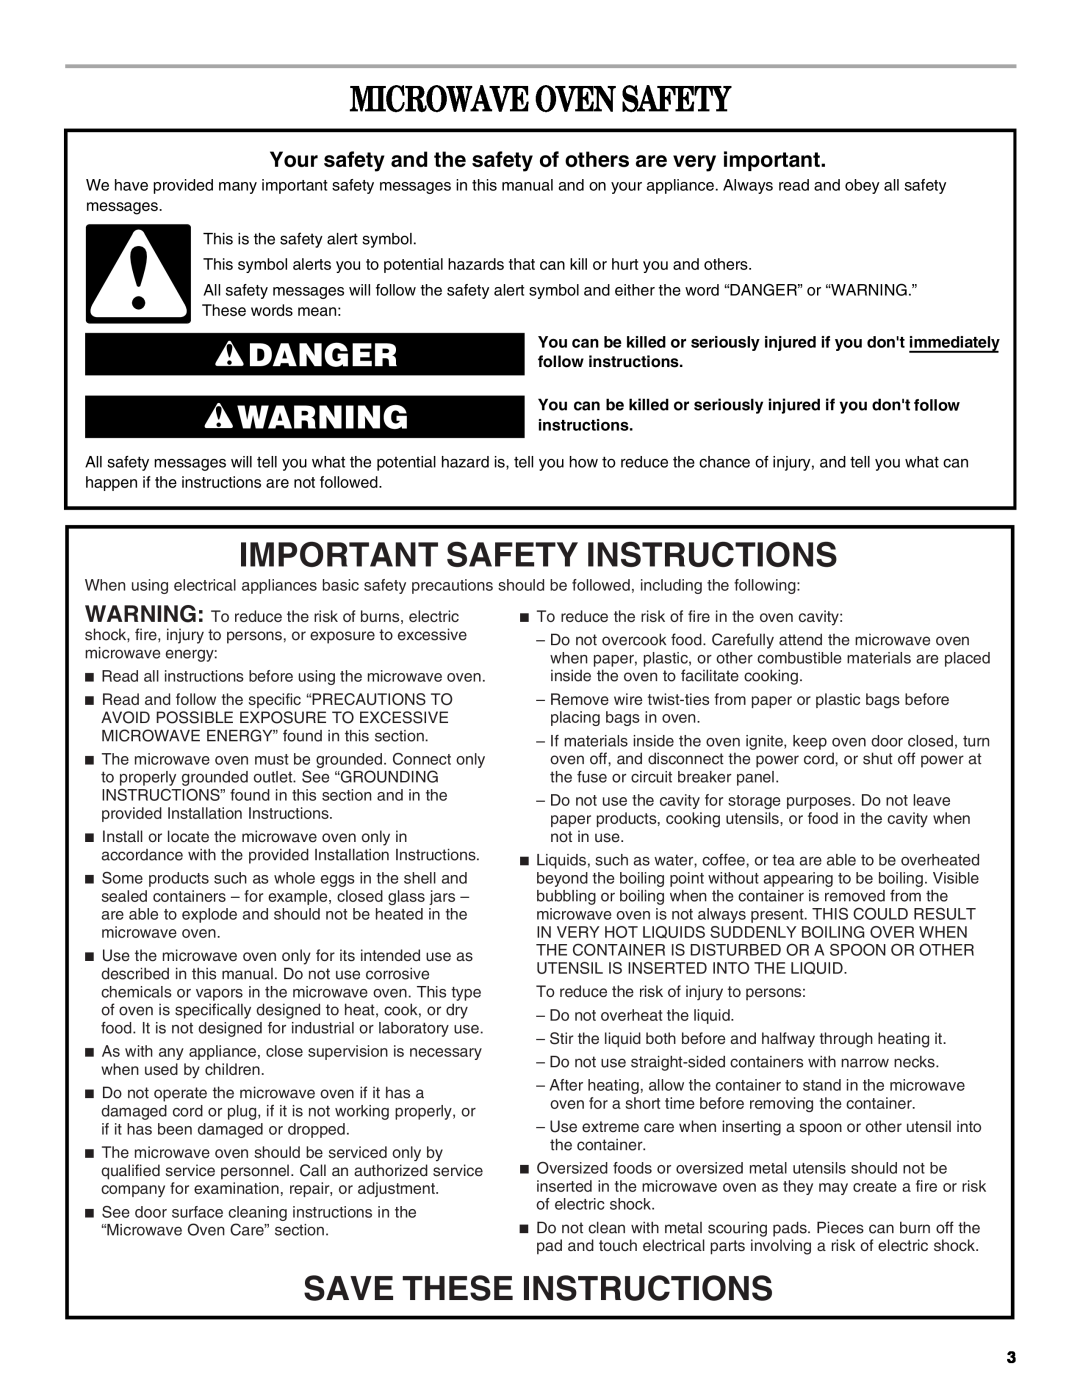 Whirlpool WMC20005YD manual Microwave Oven Safety, Important Safety Instructions, Save These Instructions, Danger 